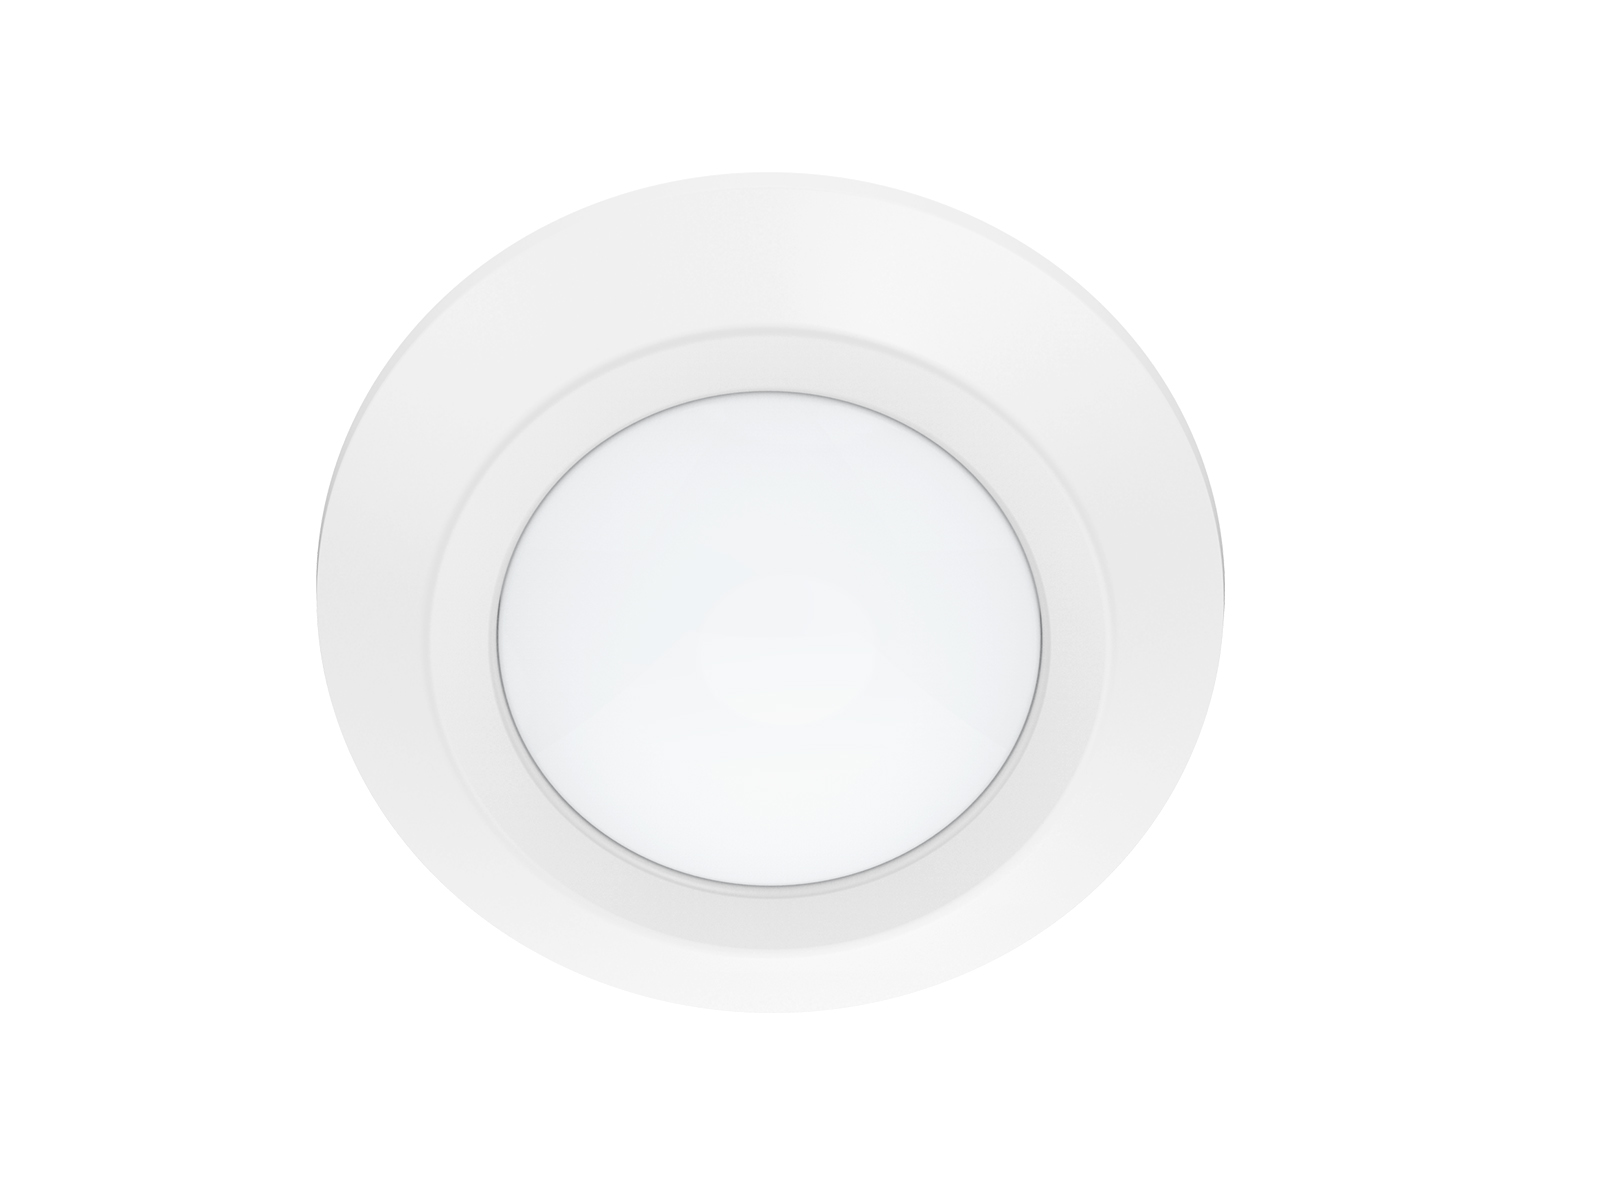 6 inch led recessed ceiling light